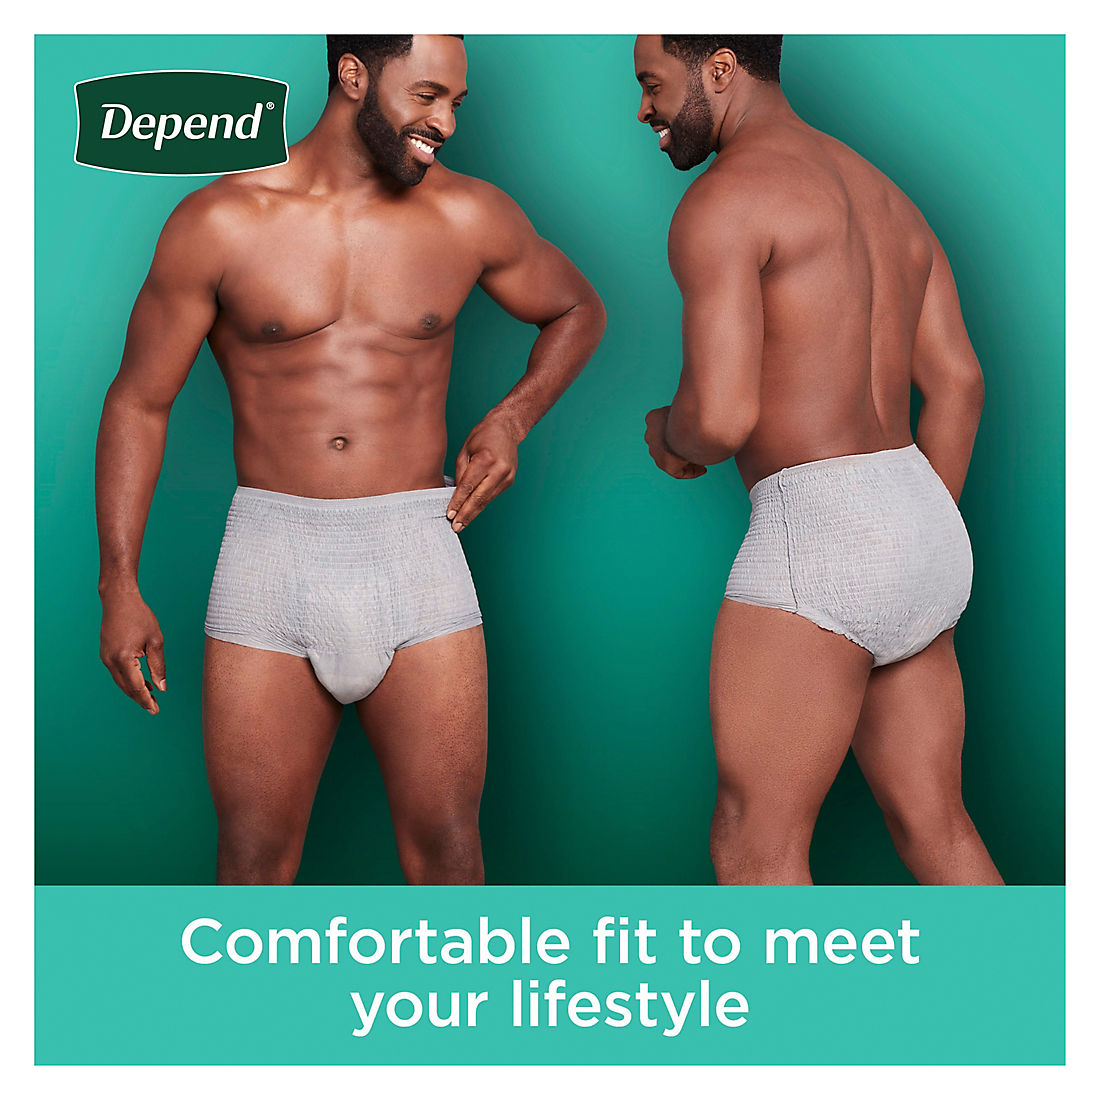 Depend Fresh Protection Adult Incontinence Underwear for Men, Large - Grey,  84 ct.